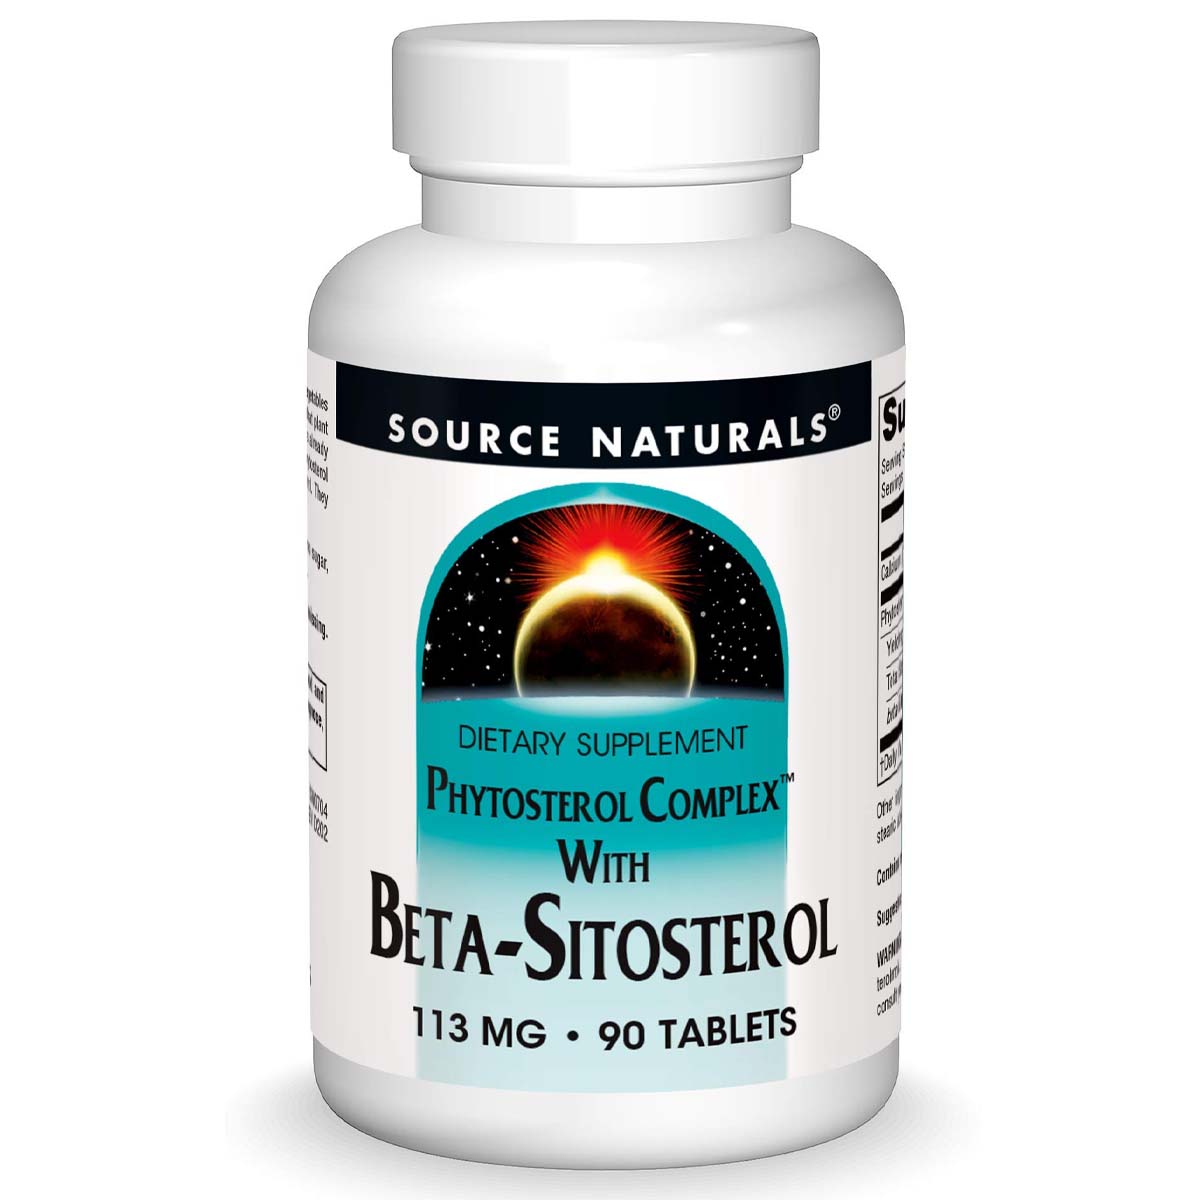 Source Naturals Phytosterol Complex with Beta Sitosterol, 113 mg, 90 Tablets